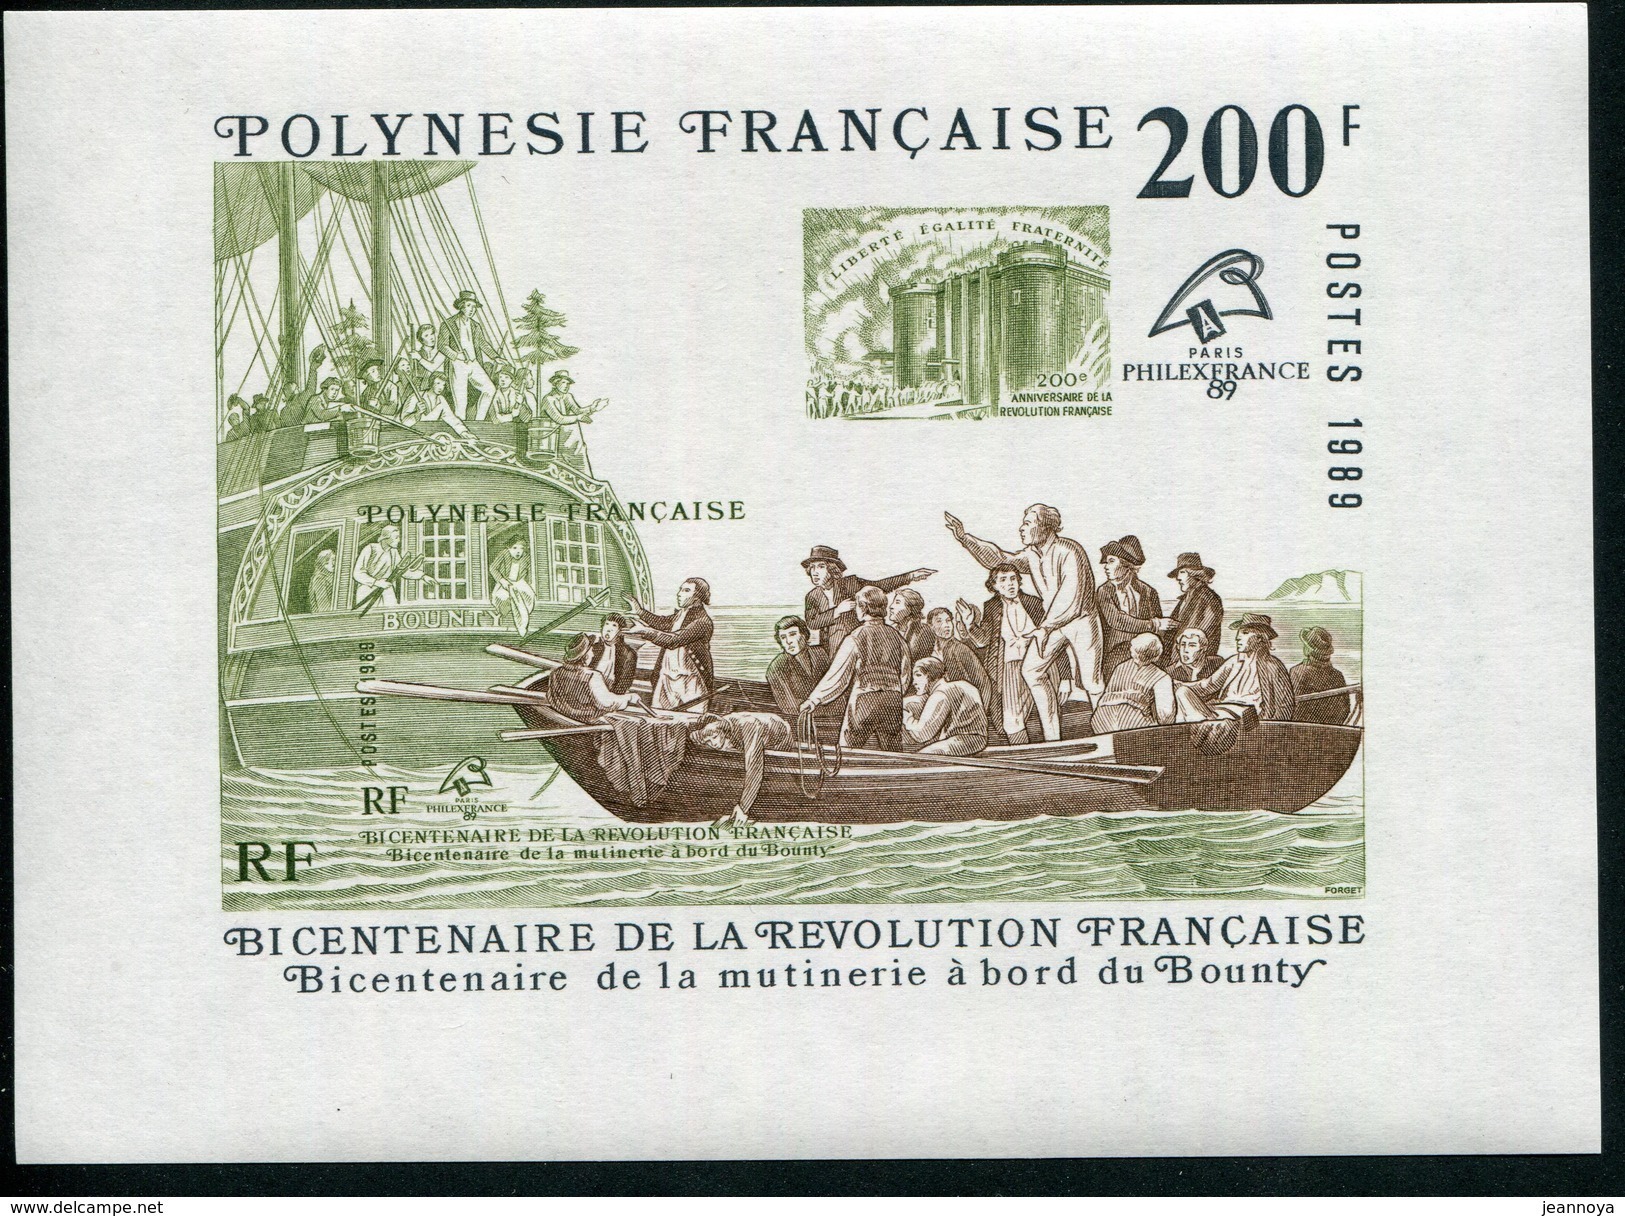 POLYNESIE FRANCAISE - BLOCS & FEUILLETS N° 15  * * - PHILEXFRANCE 1989 - LUXE - Hojas Y Bloques